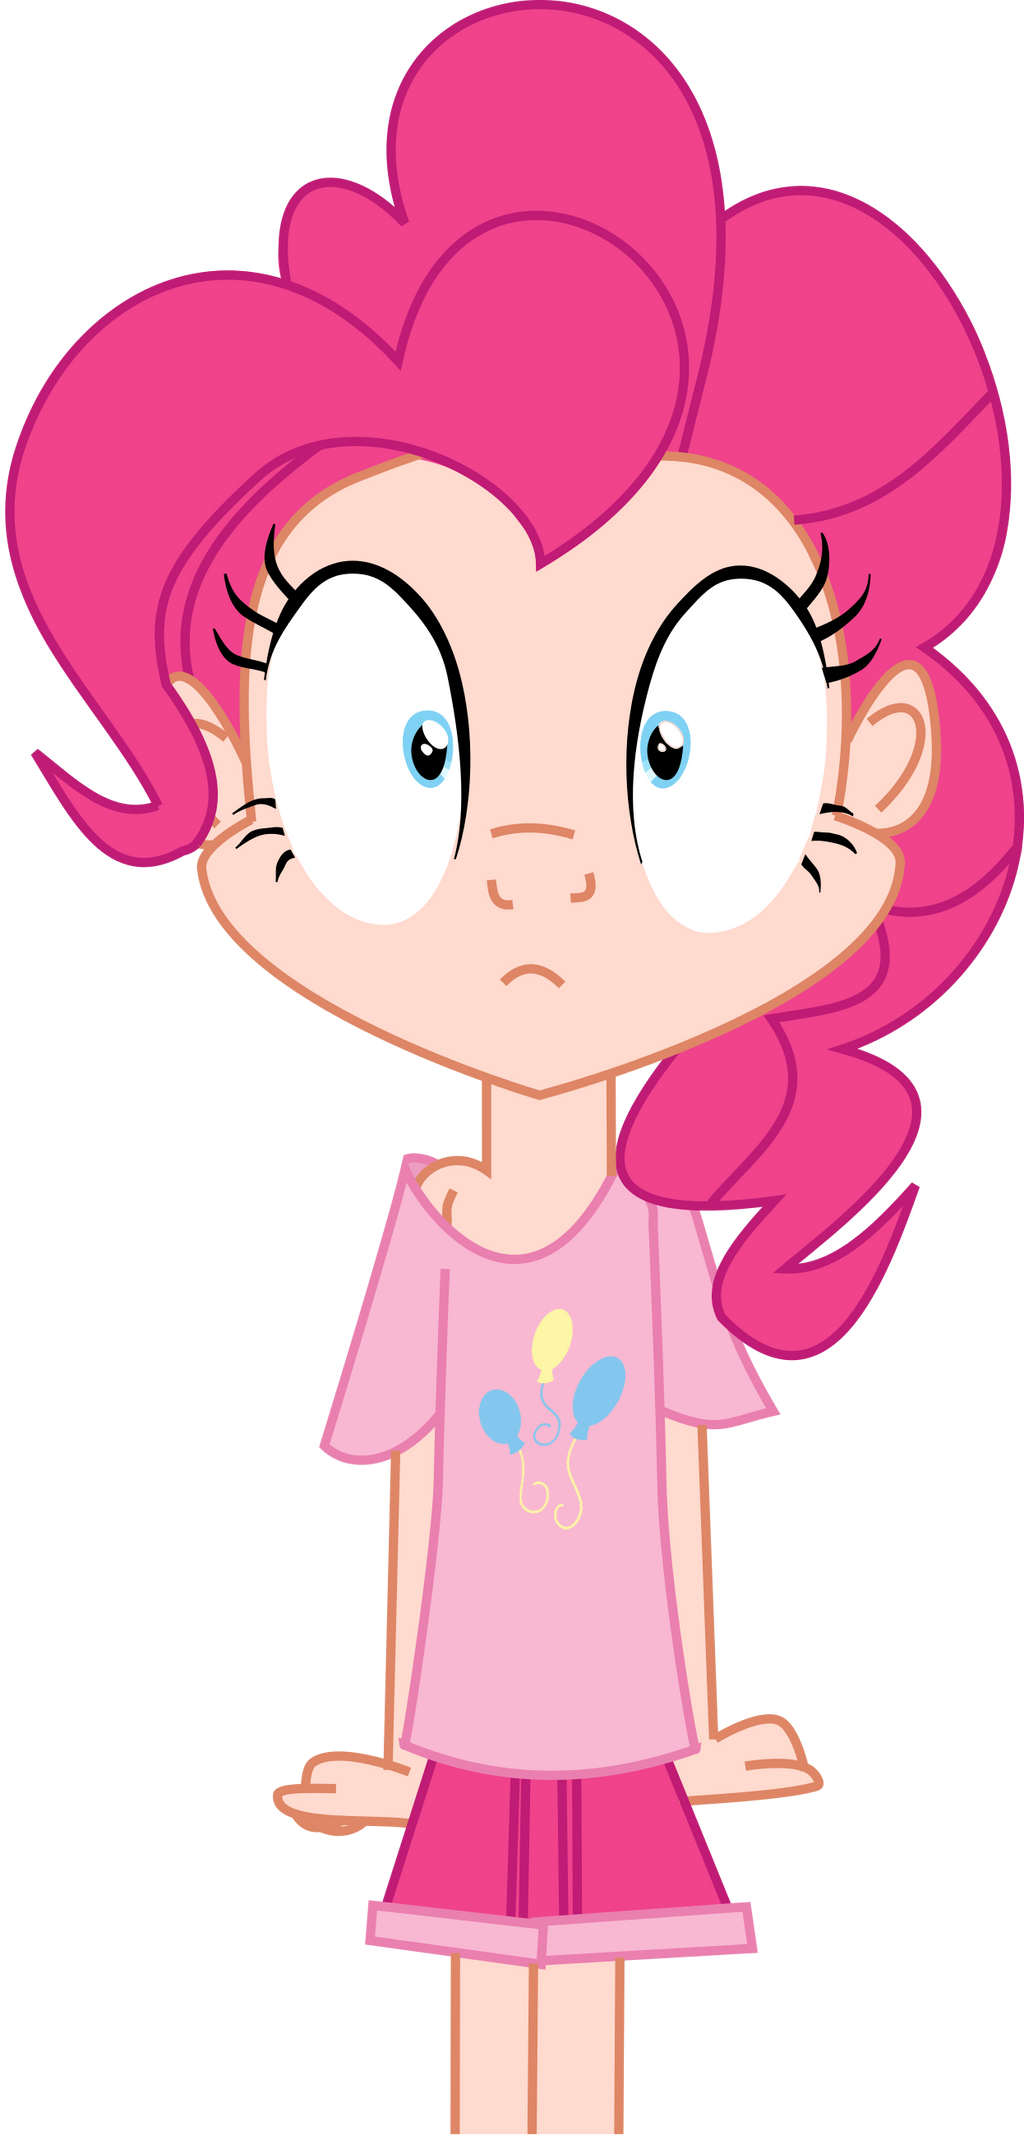 Pinkie Pie Hypno (From MLP S6 E21, Humanized) by Michaelsety on DeviantArt